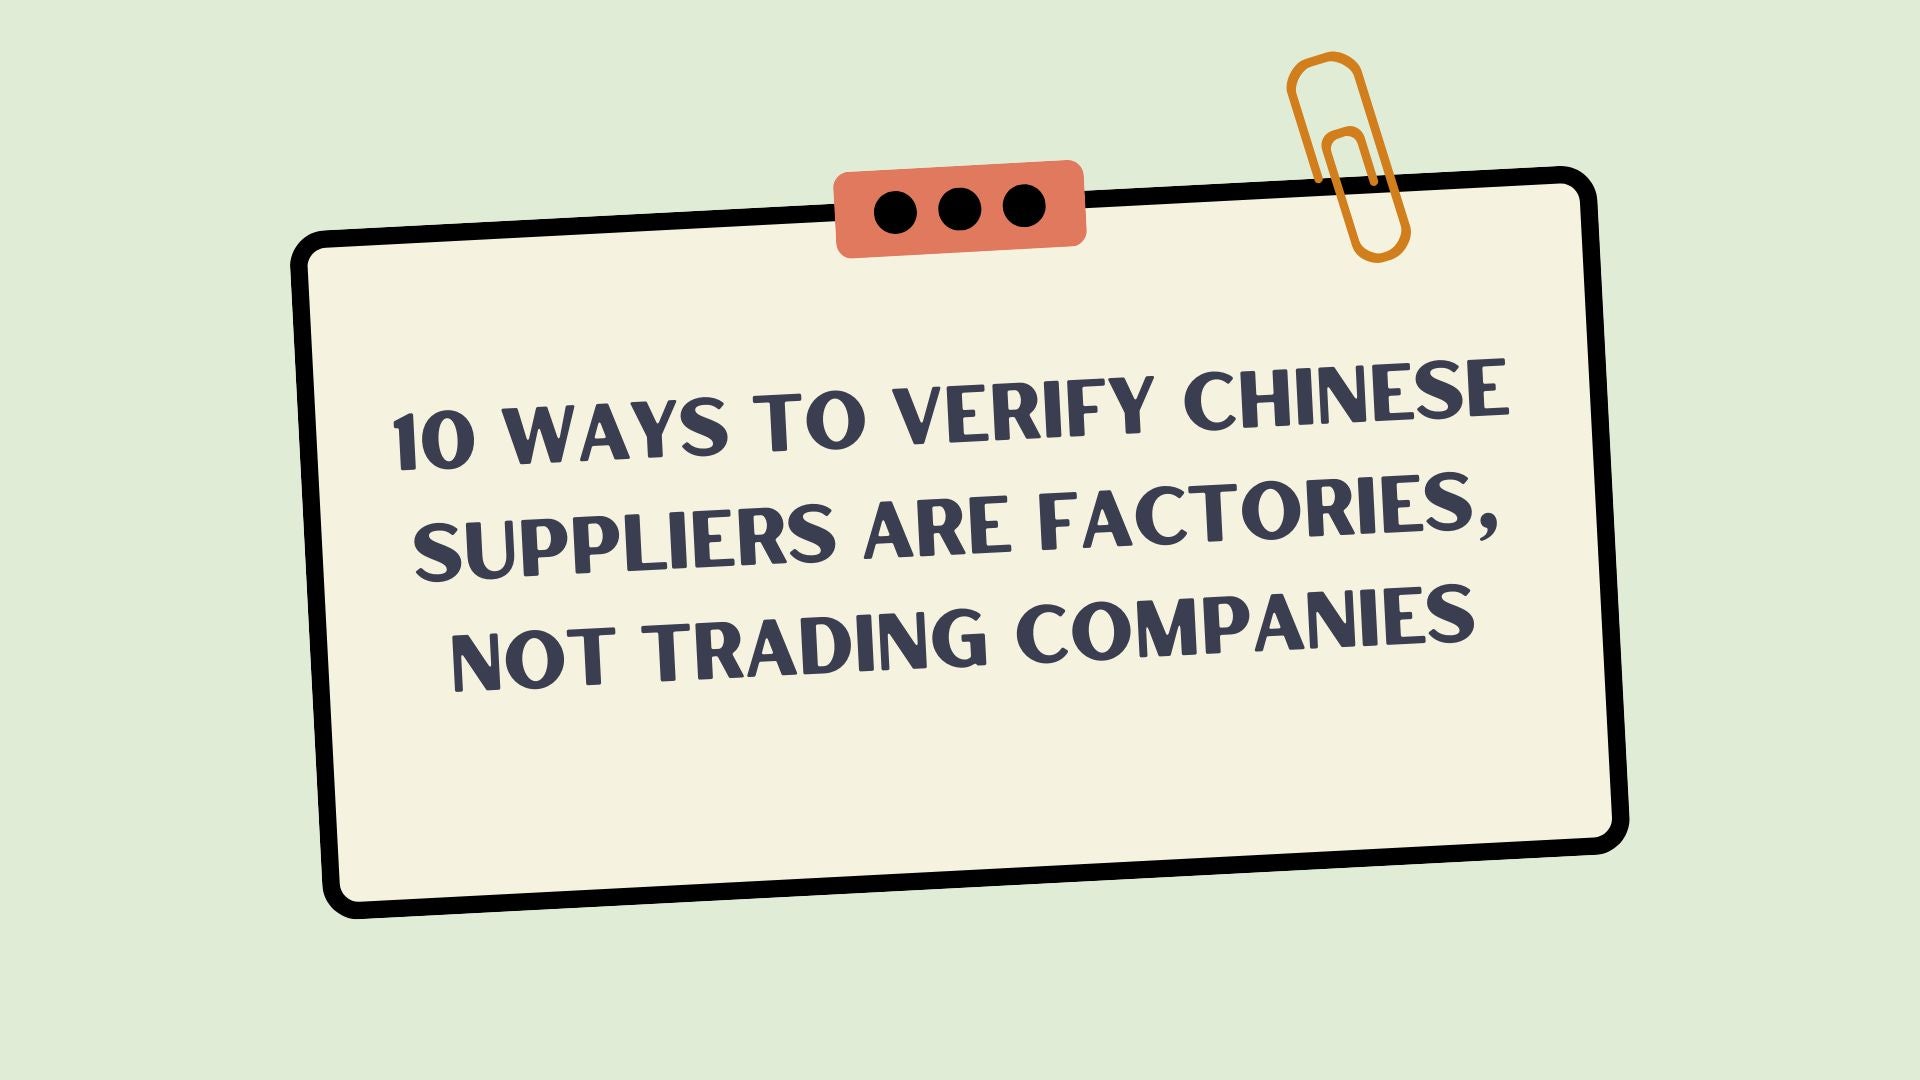 10 Ways to Verify Chinese Suppliers Are Factories, Not Trading Companies